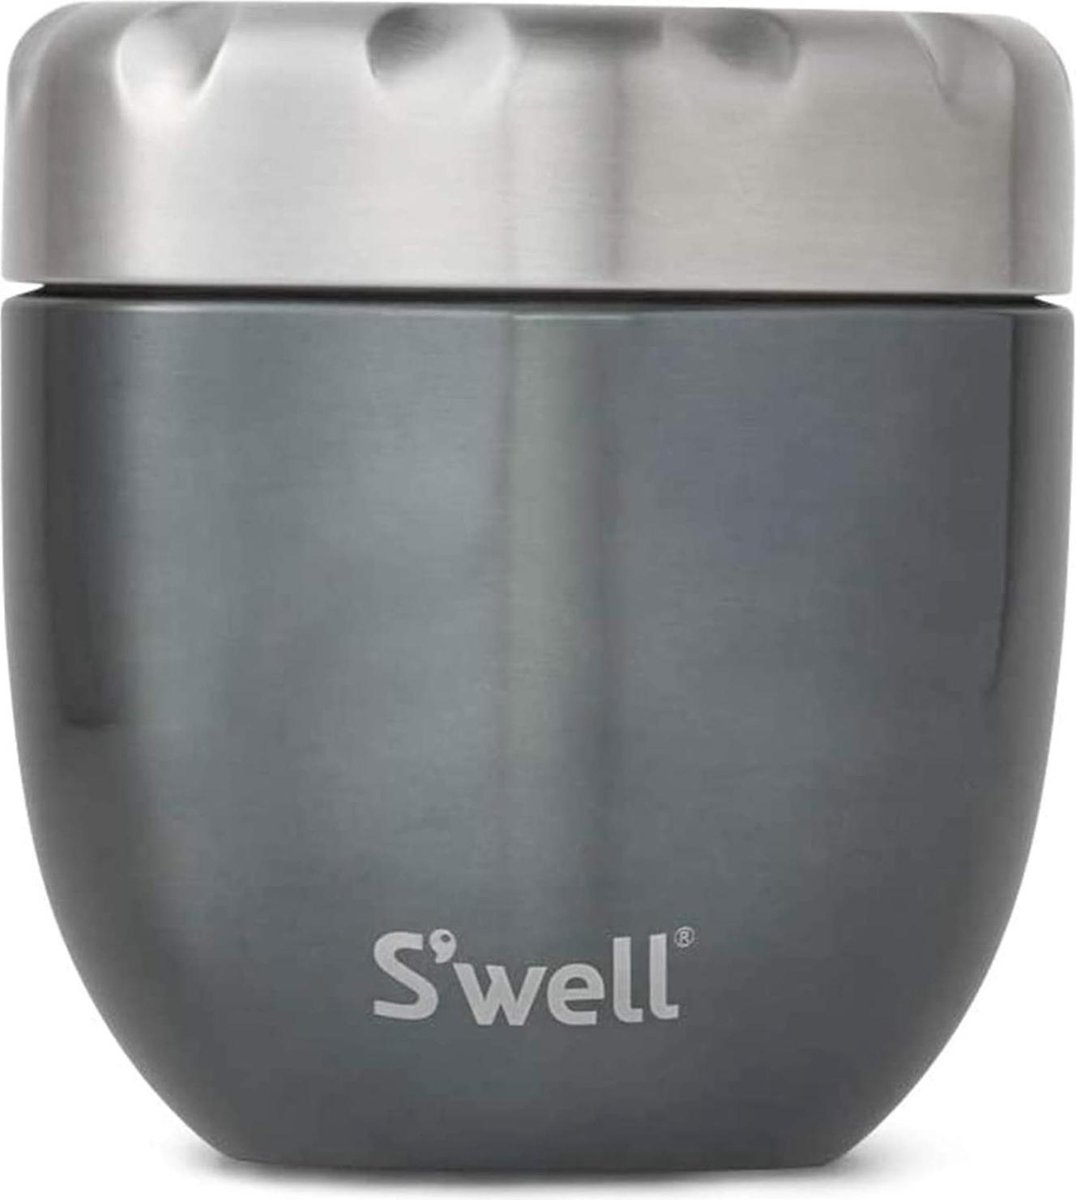 S'well Eats Blue Suede Food bowl 473 ml